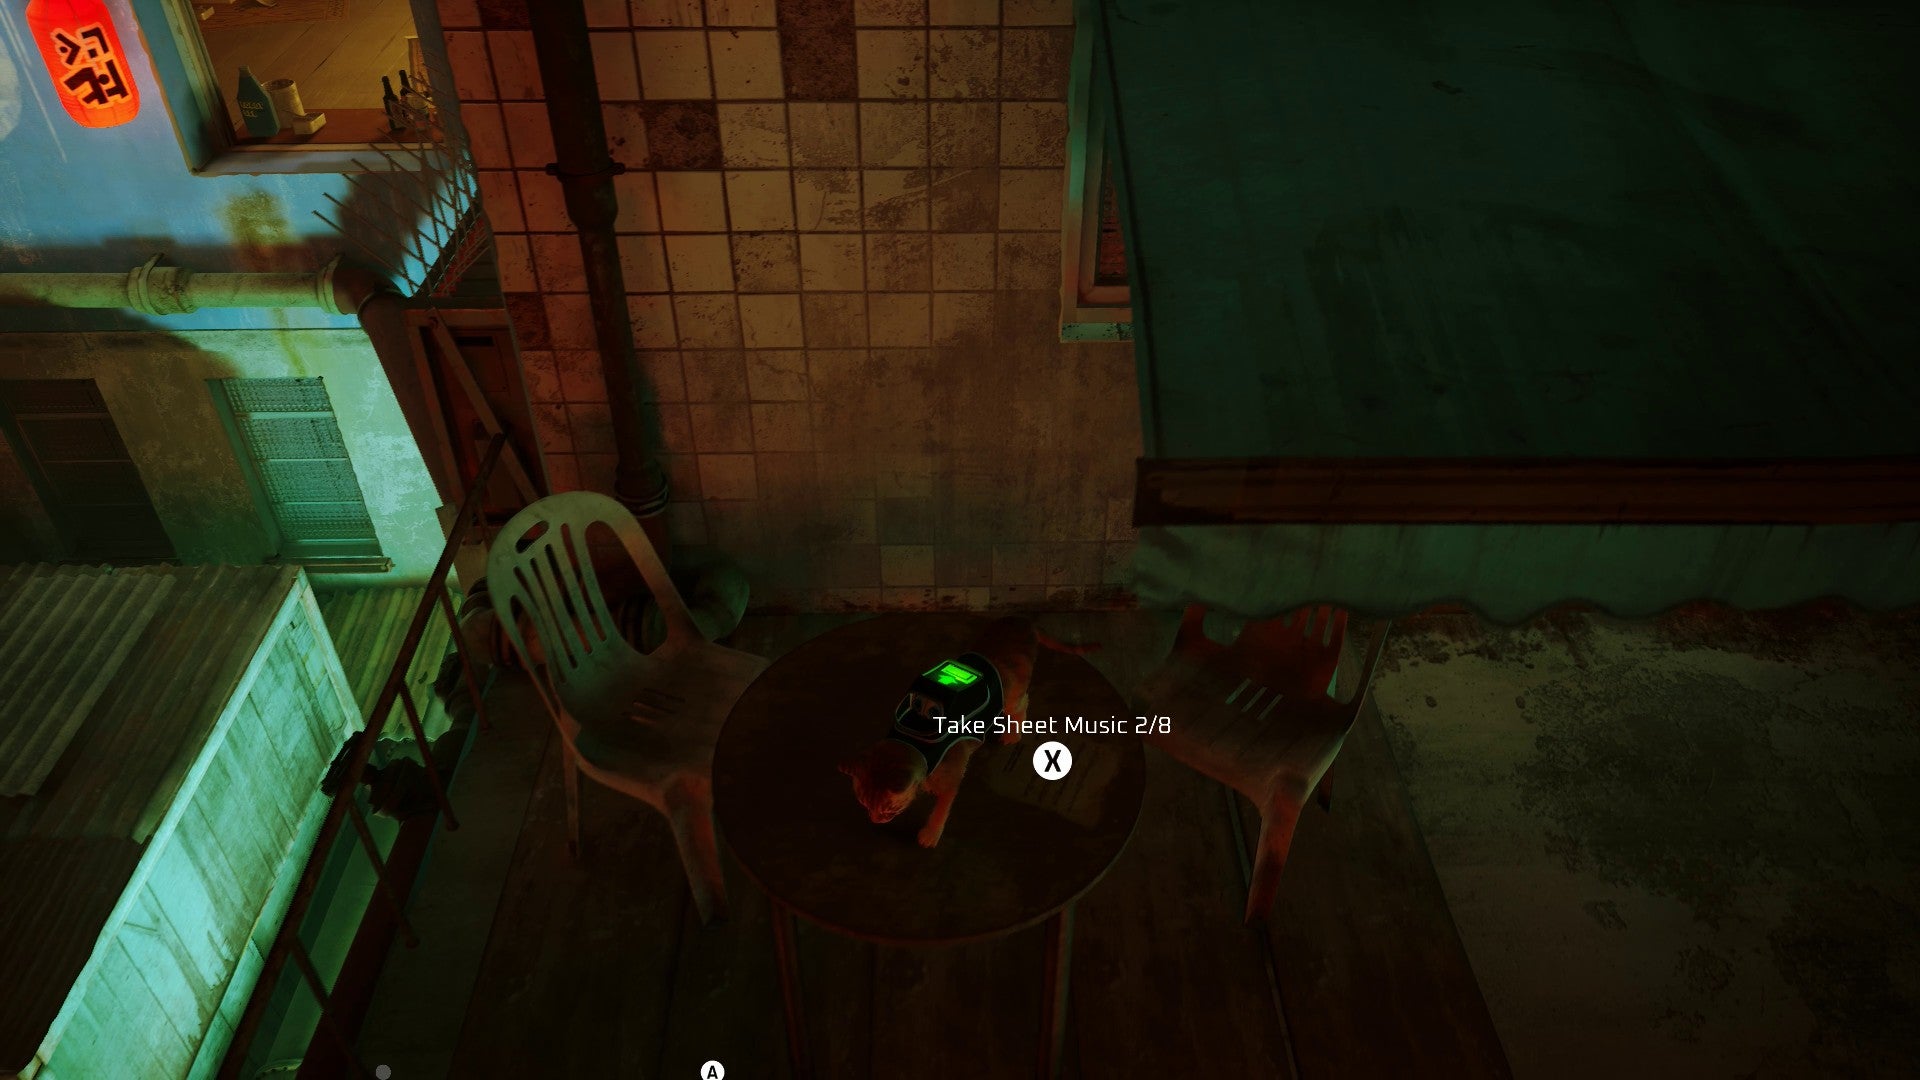 Stray screenshot showing a cat stood on a garden table on a balcony. The cat is staring at a piece of sheet music. On the left, the street below is lit with neon signs.